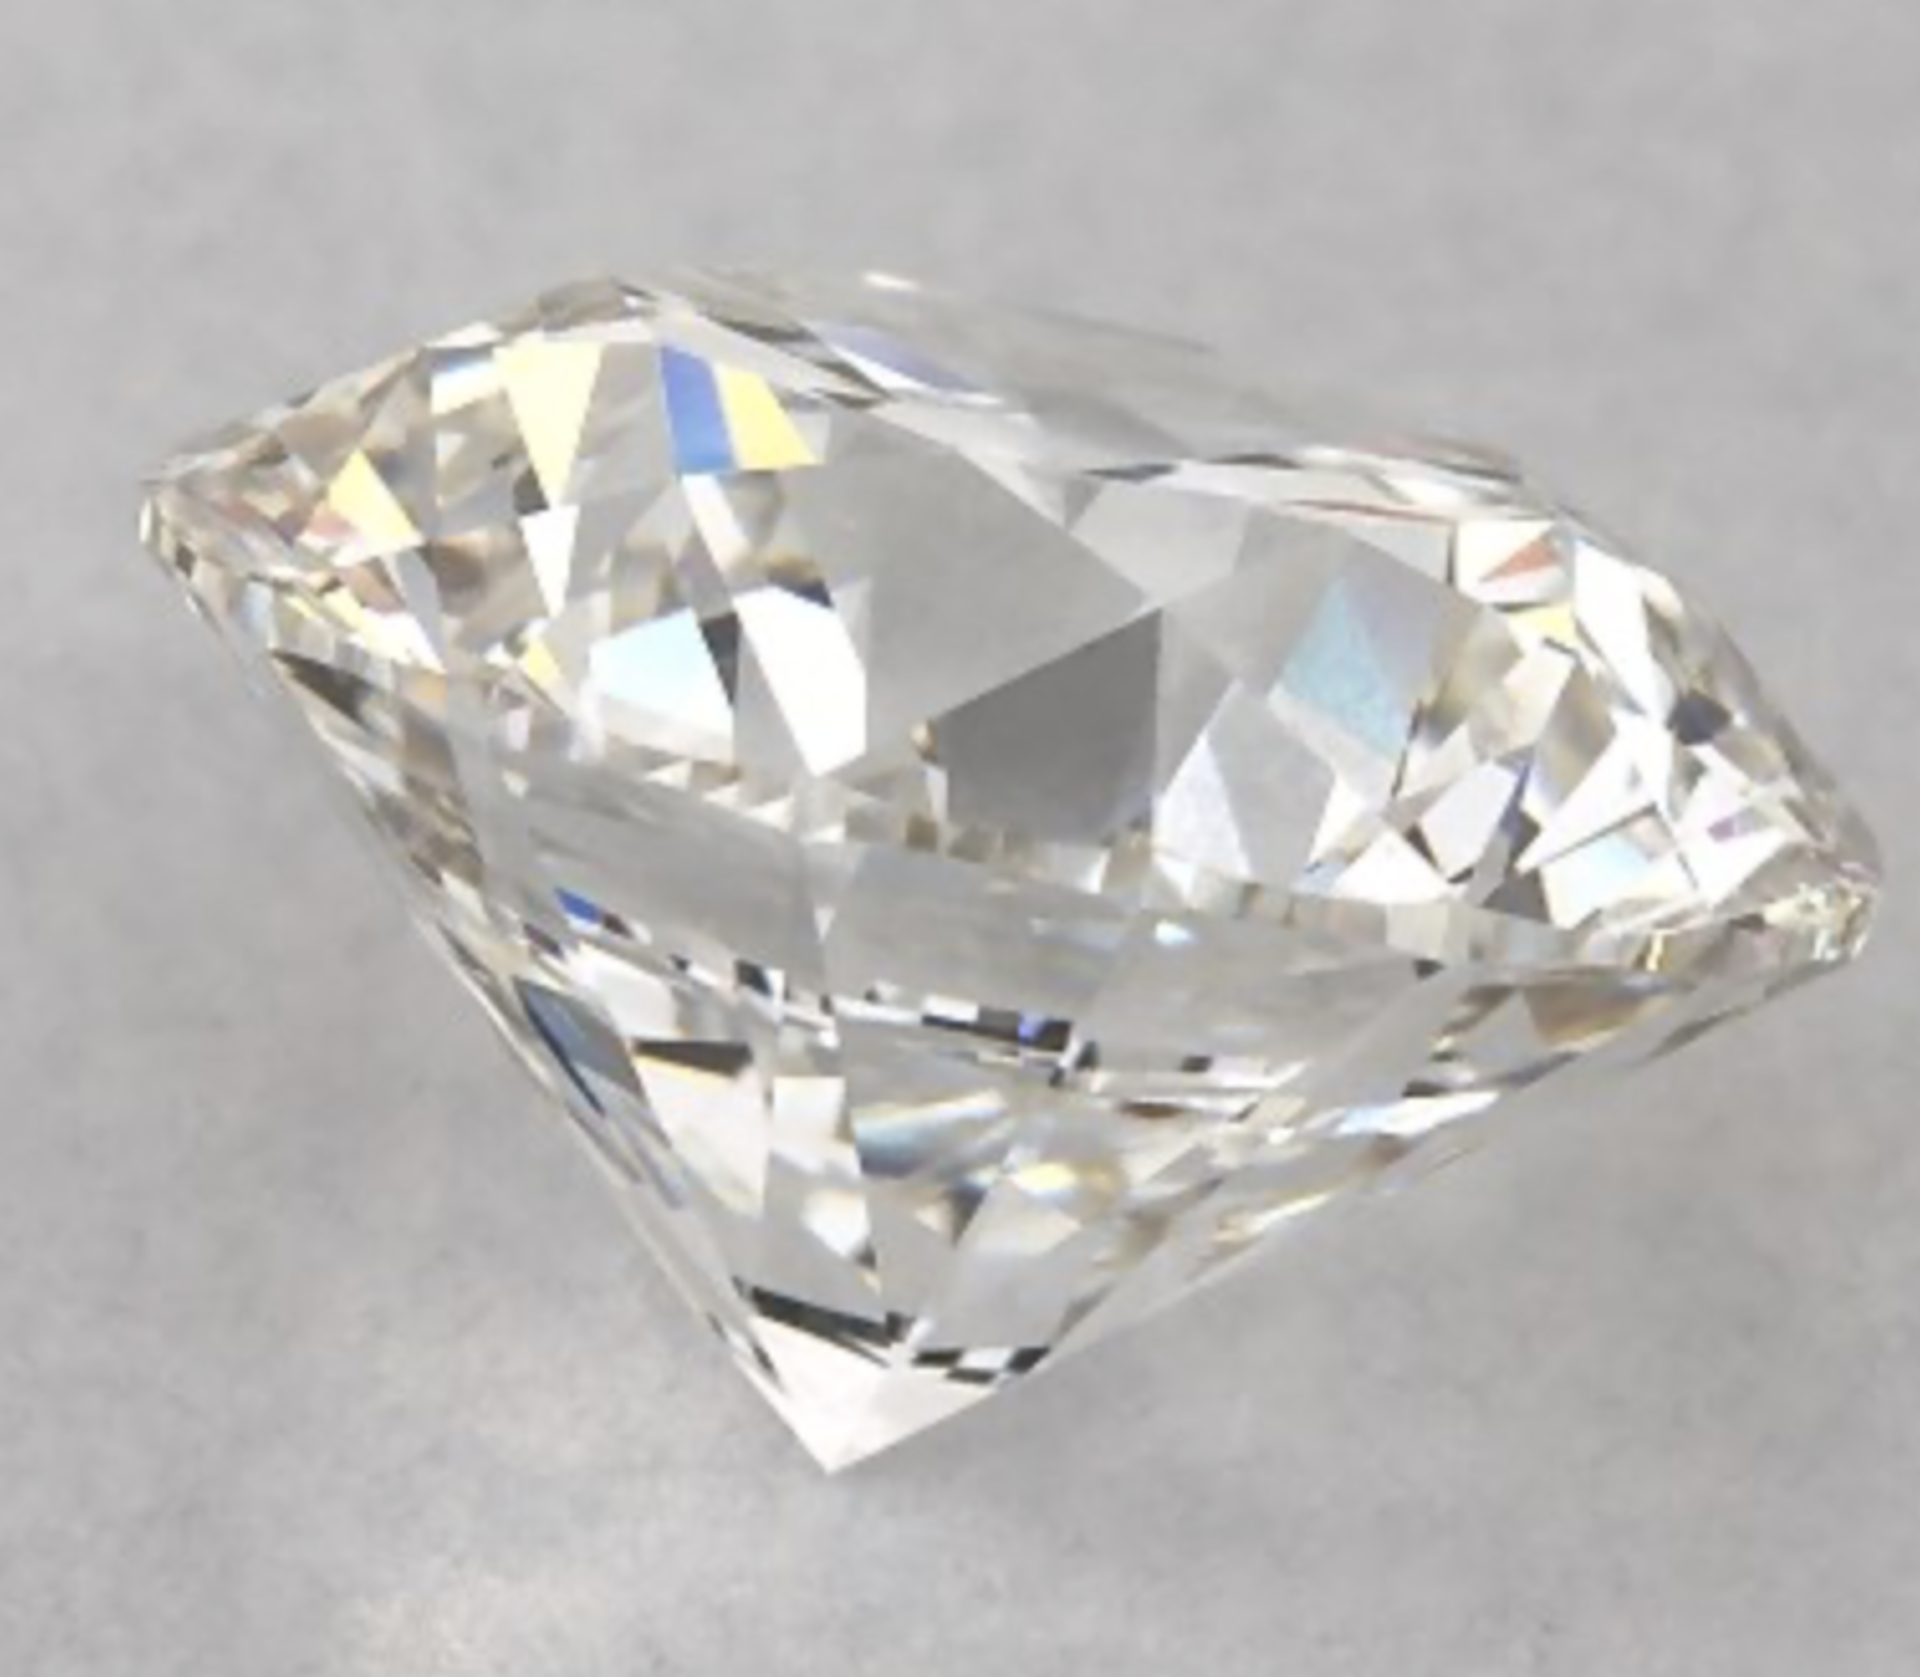 ** ON SALE ** Certified Brilliant Cut Diamond 2.10 CT ( Natural ) **VS1 H colour** Full Certificate - Image 7 of 11